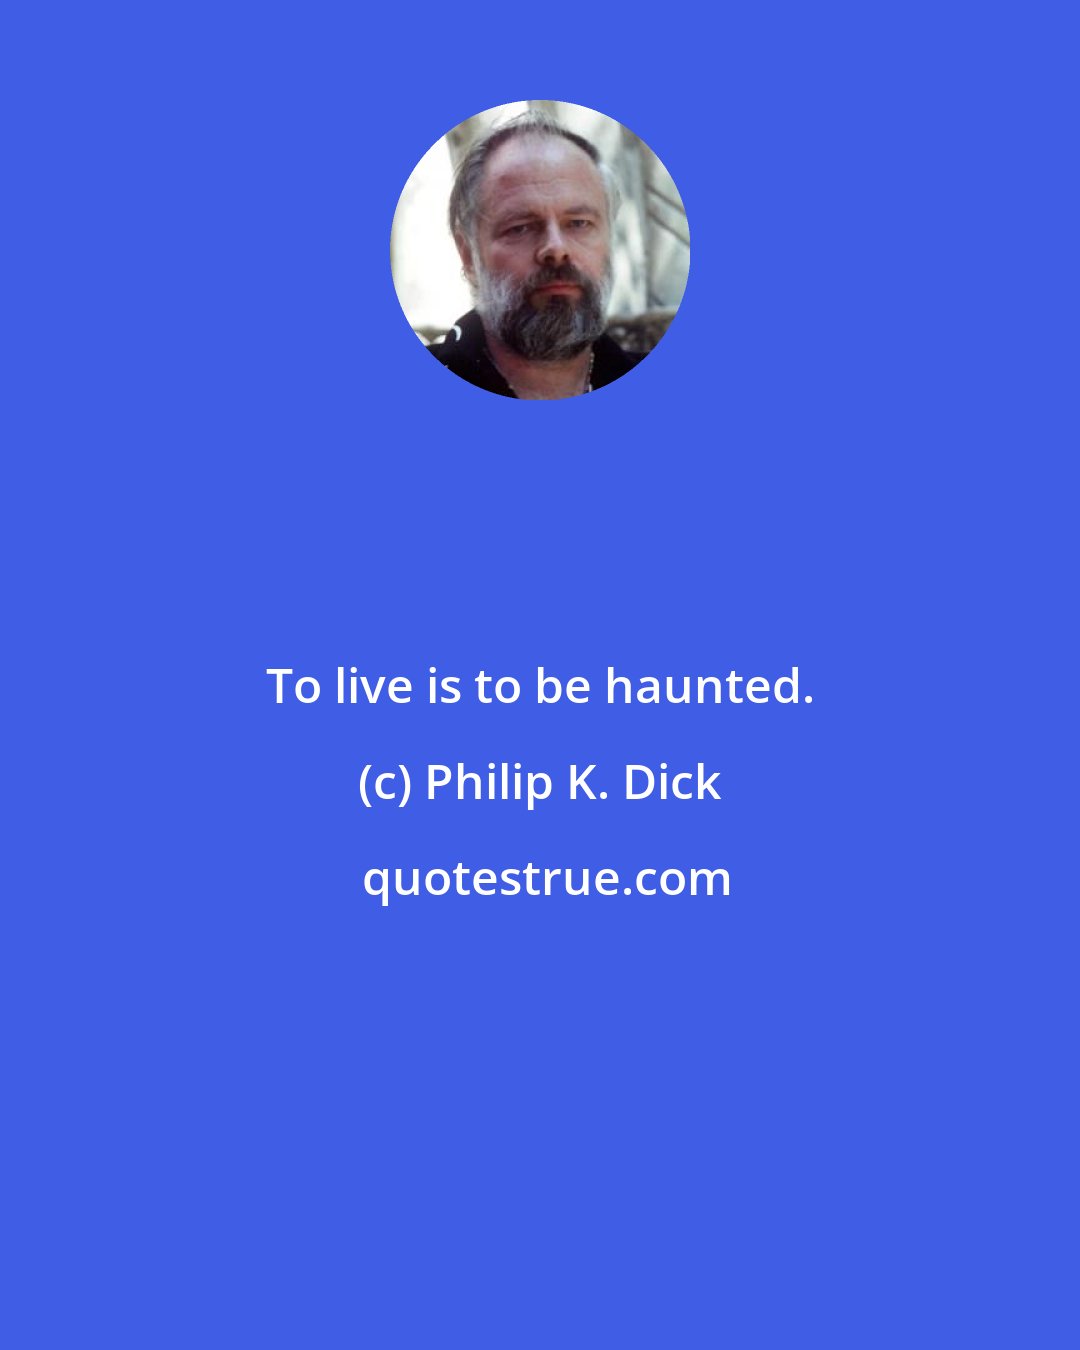 Philip K. Dick: To live is to be haunted.